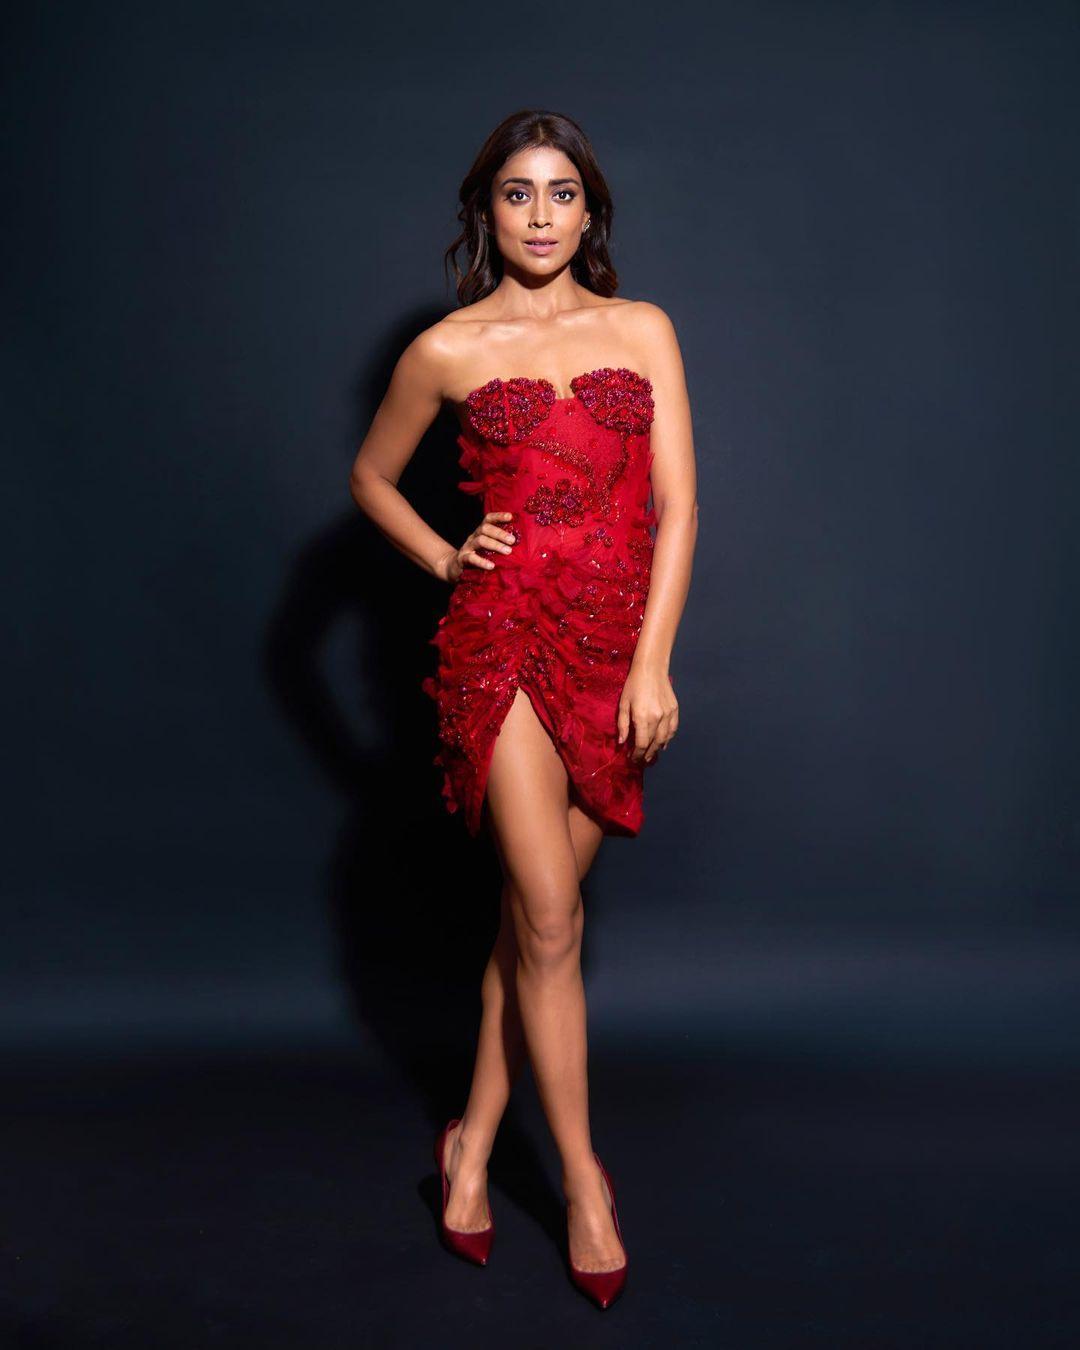 To complement her daring red hot dress, Shriya opted for a makeup look that emphasized her features without overwhelming her overall appearance.